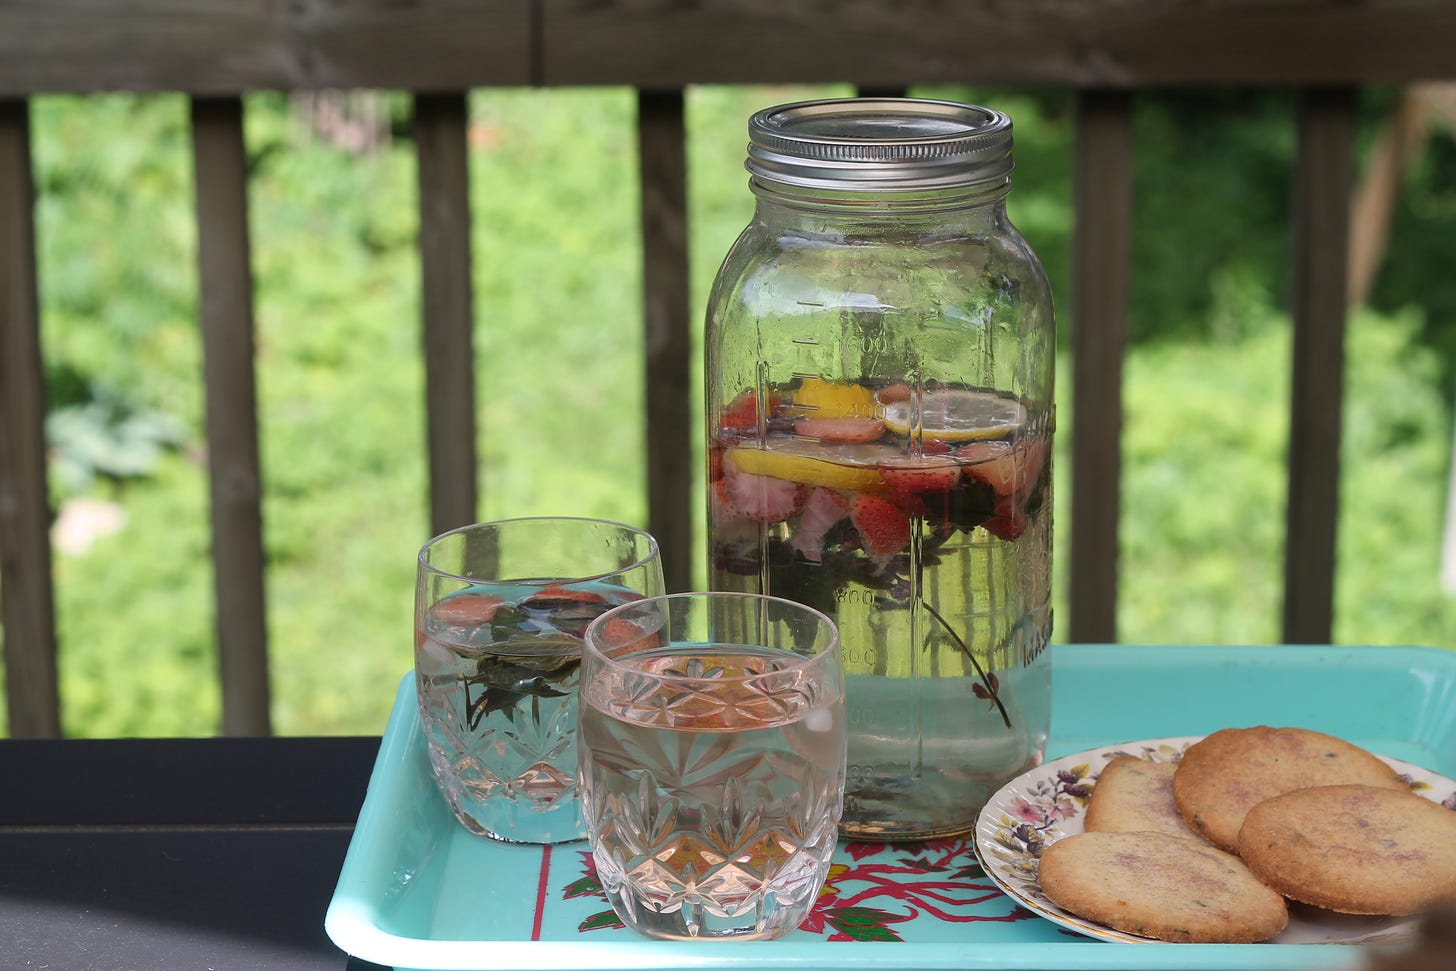 A large mason jar containing water with fruits and herbs sits beside two glasses and a plate of shortbread cookies